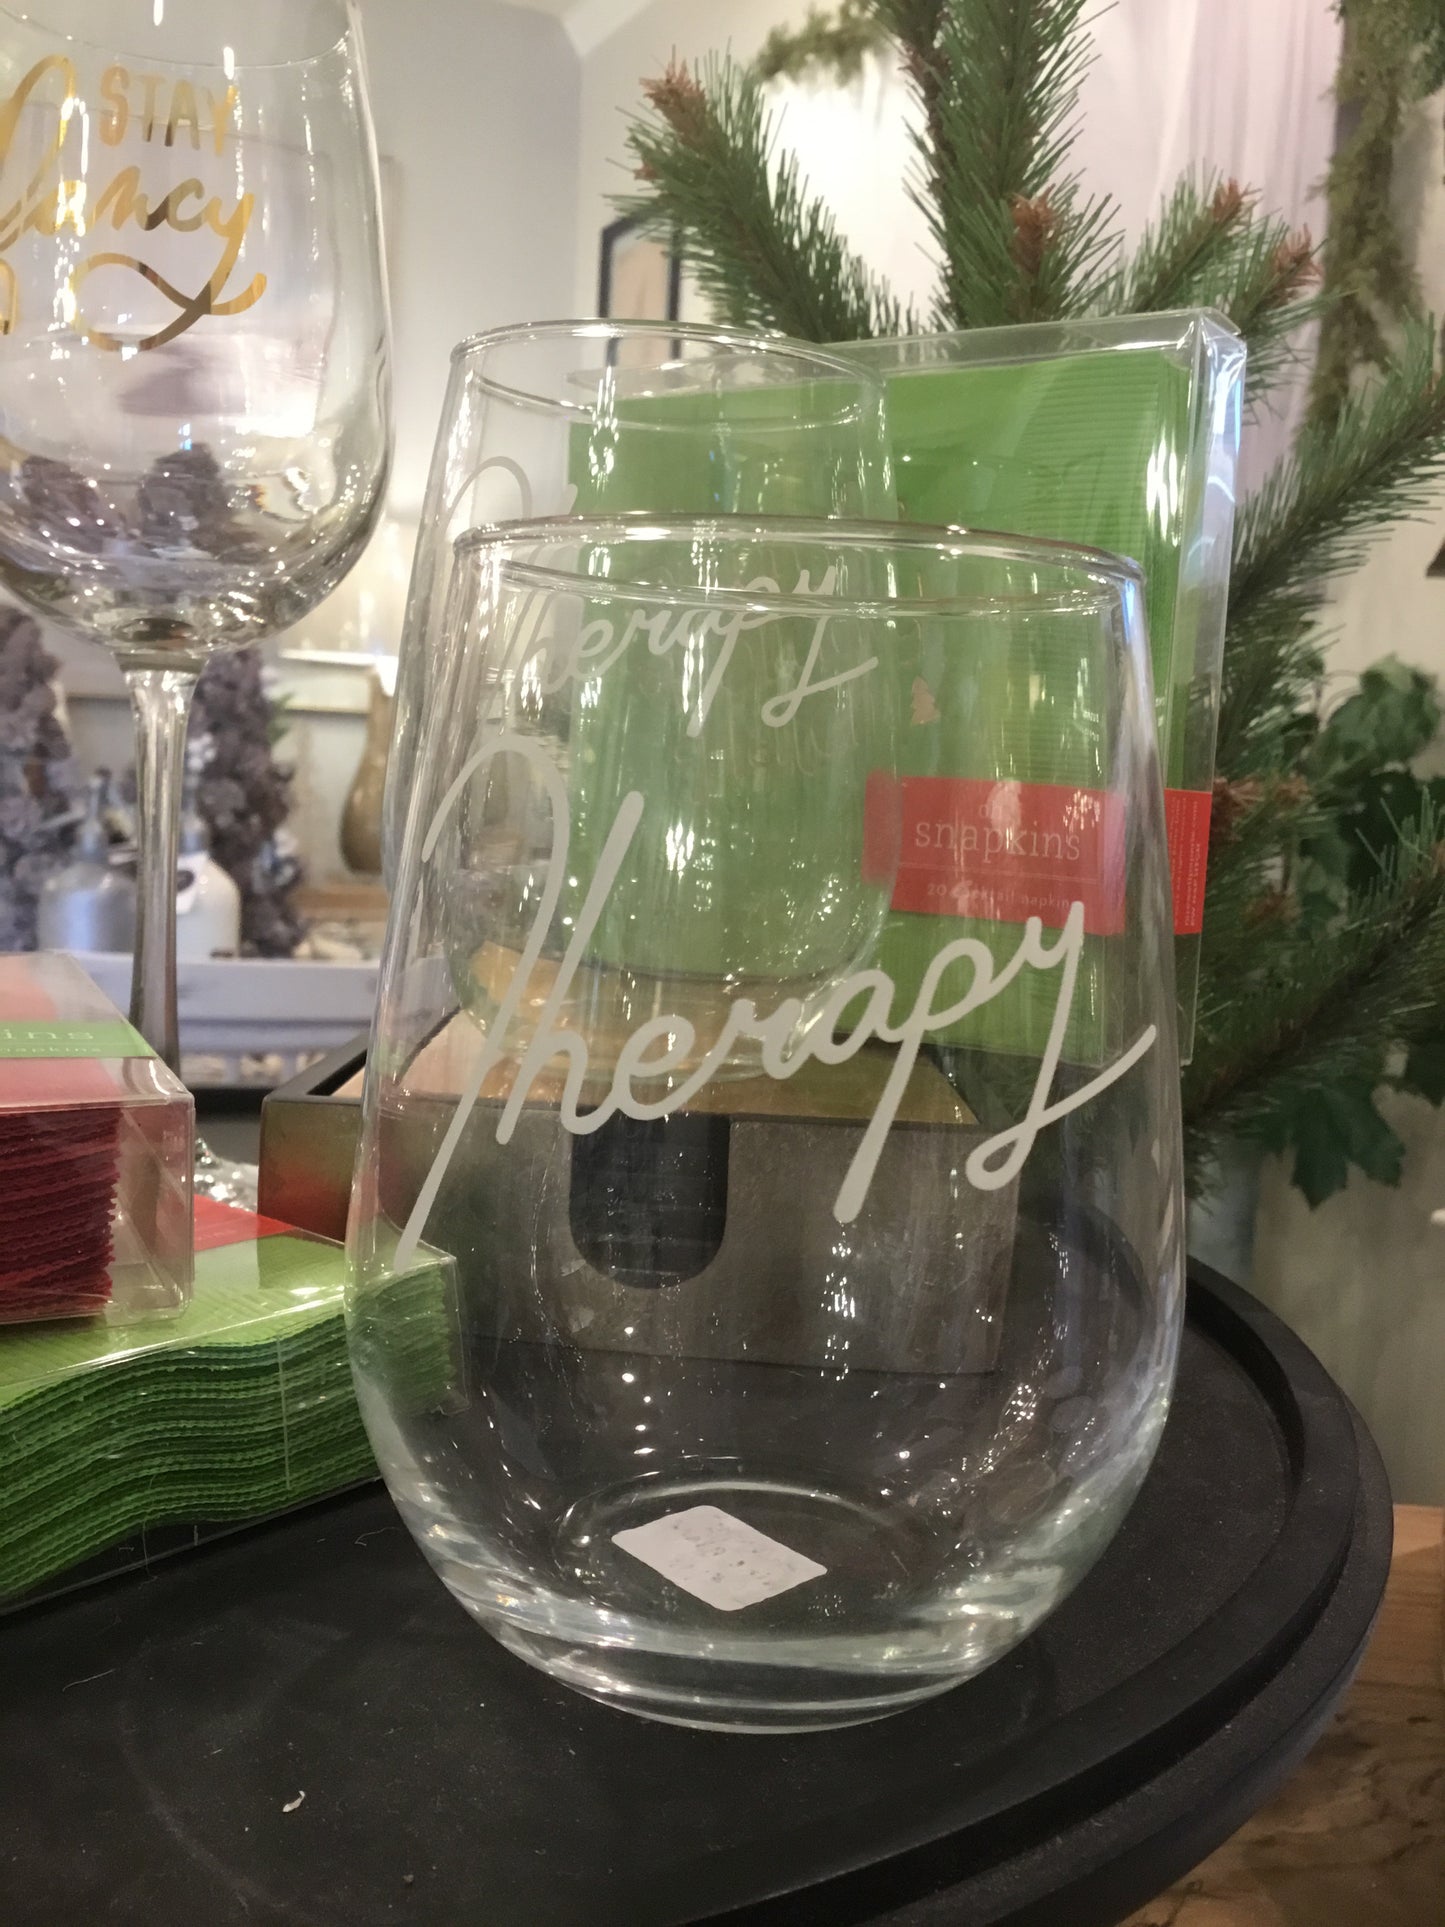 "Therapy" Wine Glass